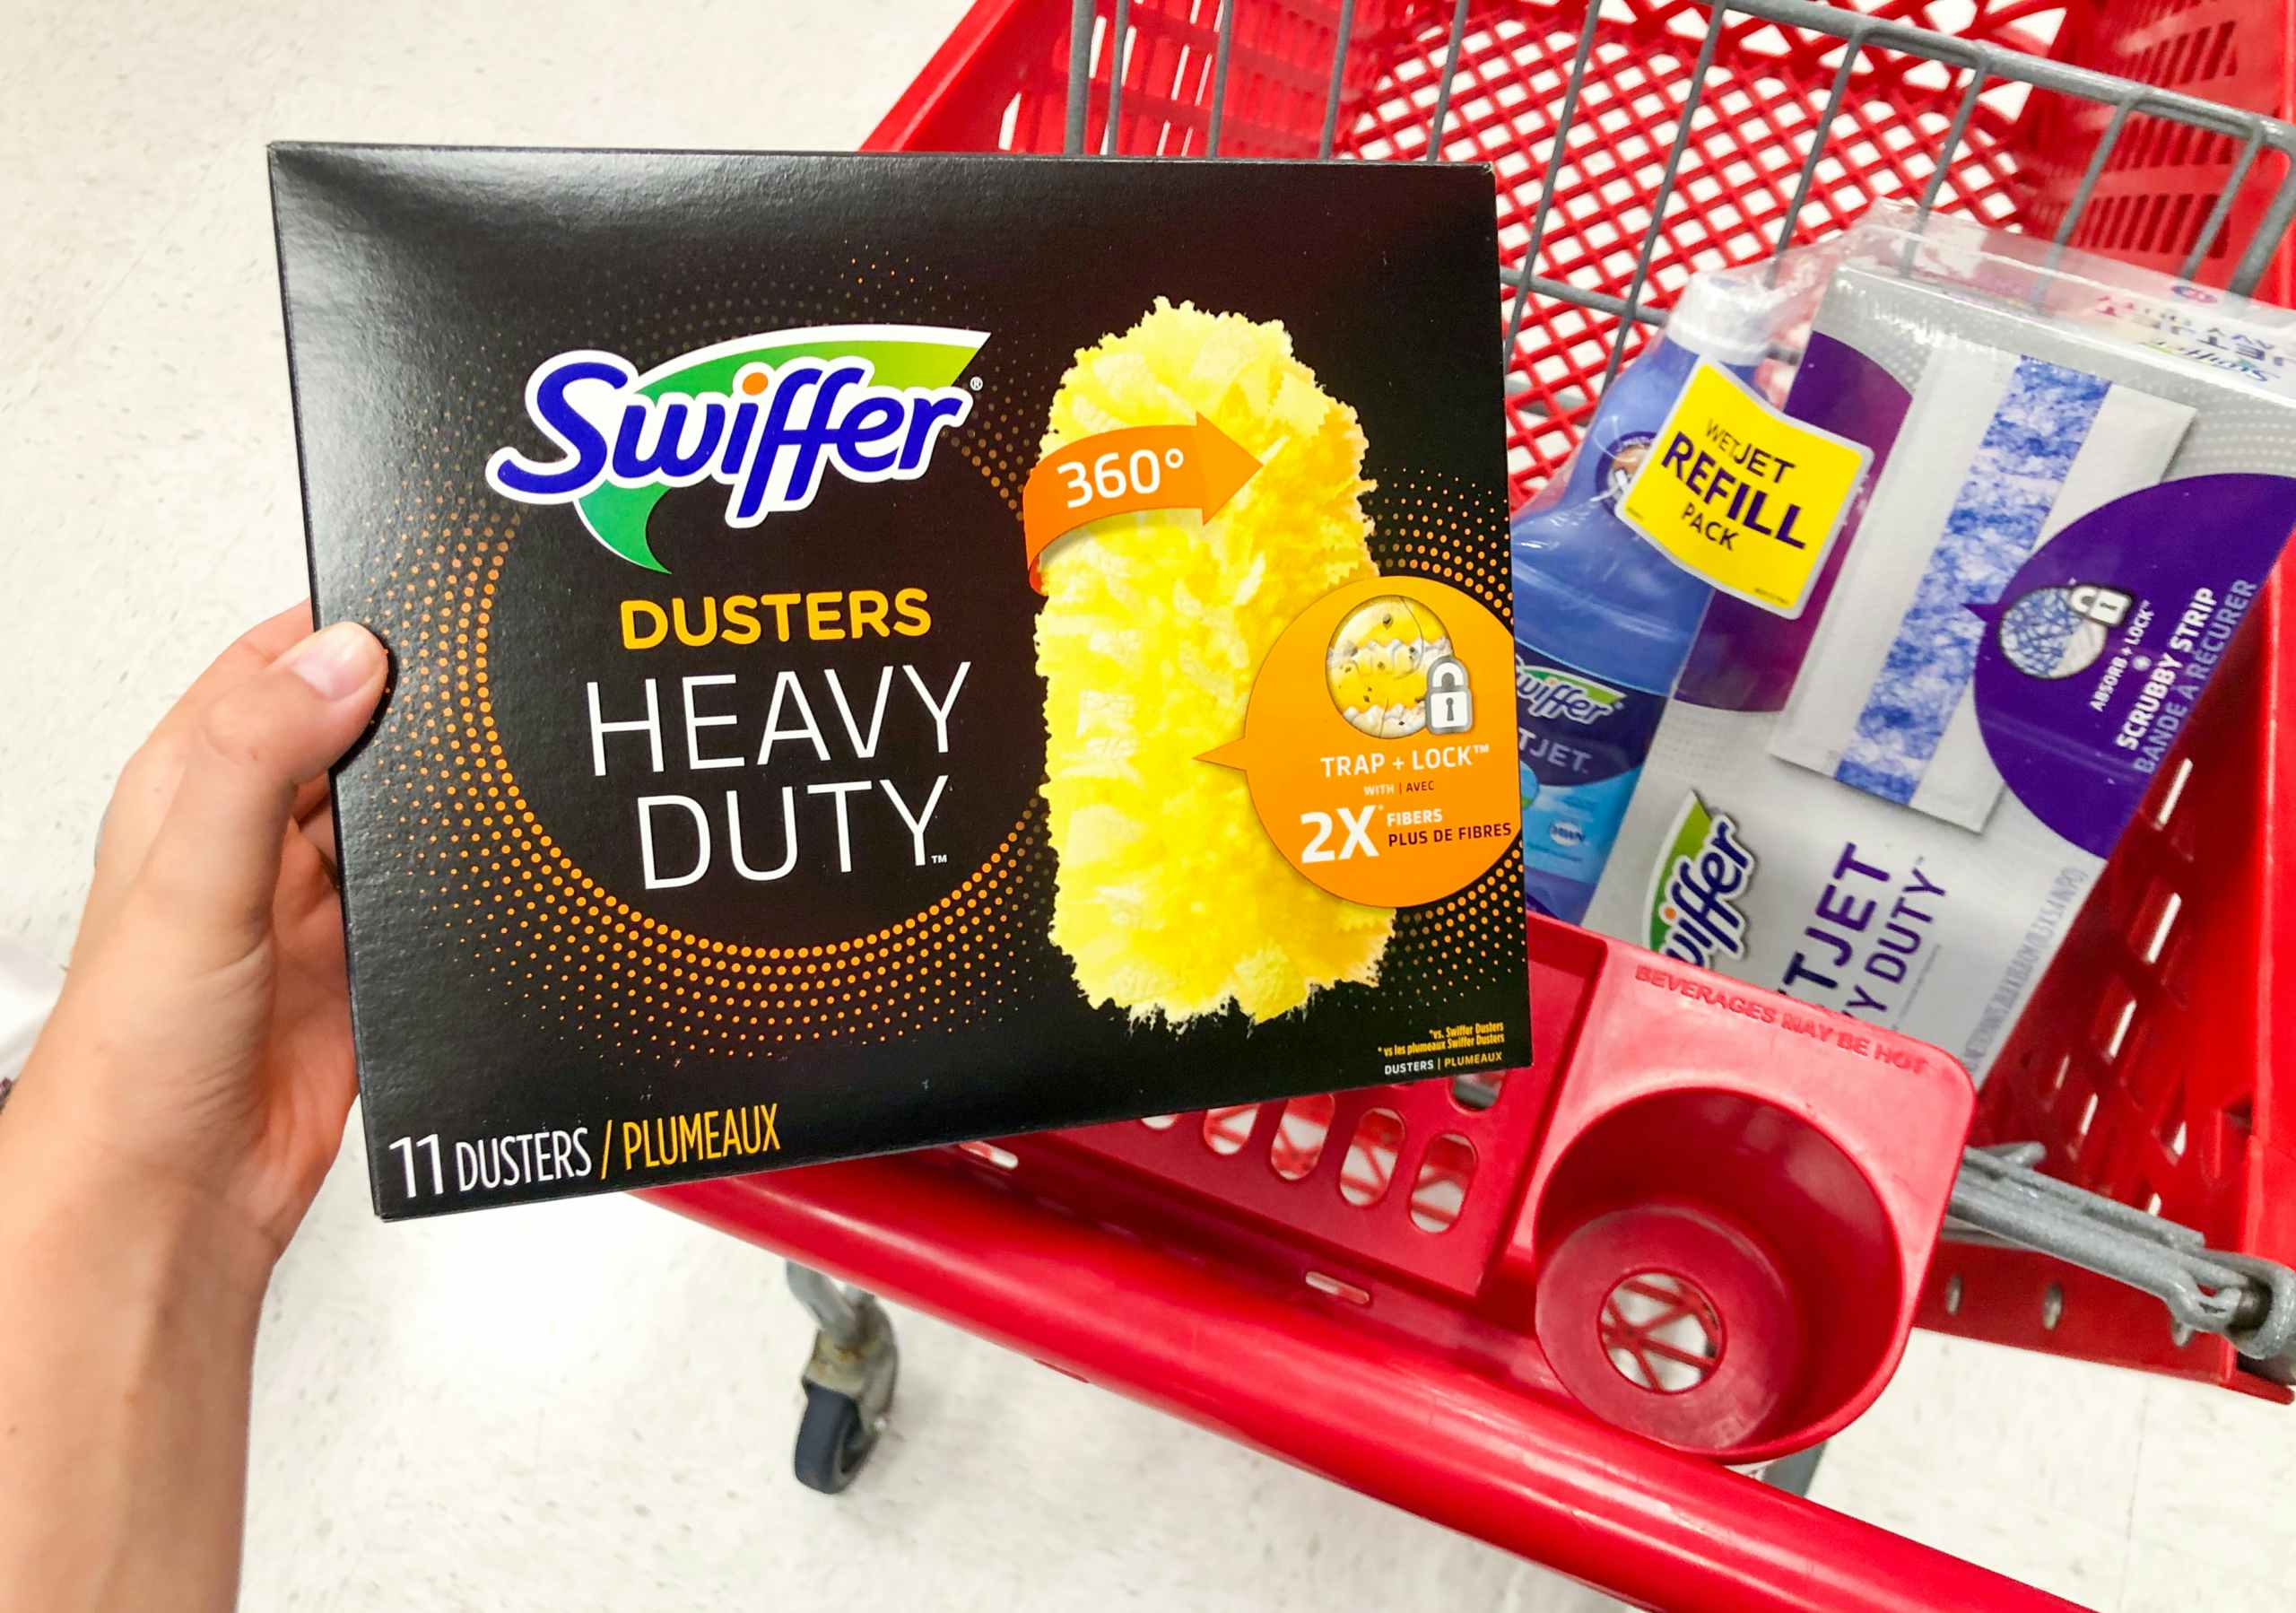 hand holding box of swiffer dusters in front of shopping cart